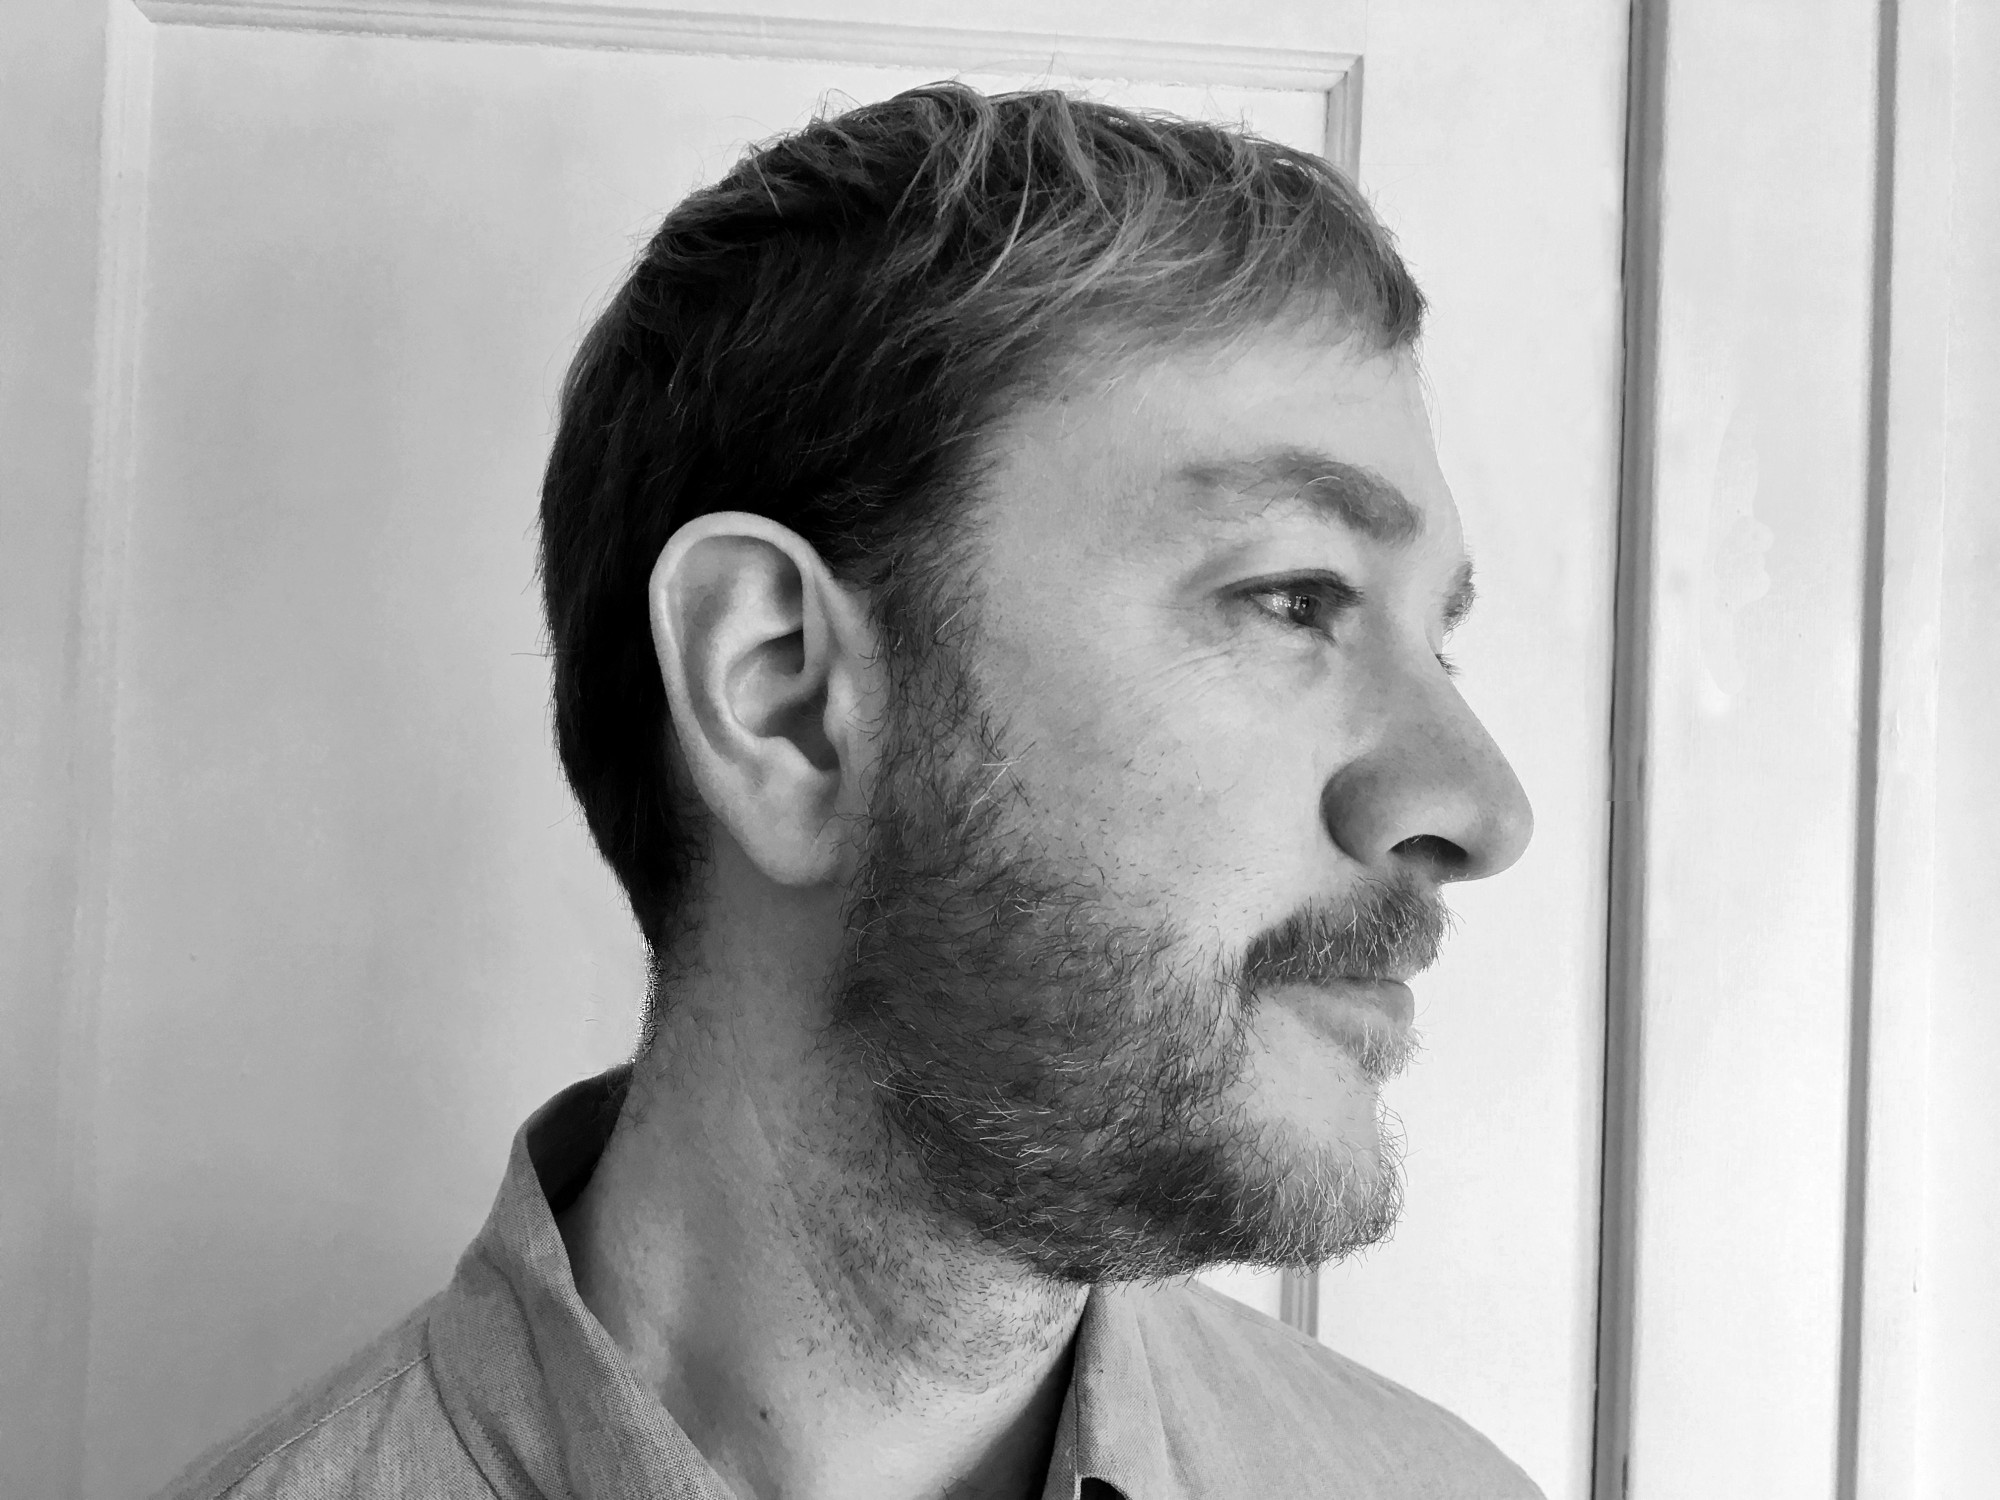 Chris Martin, captured here in black and white, offers you his right ear. He is a white man with short hair, a multicolored beard, and a collared shirt.